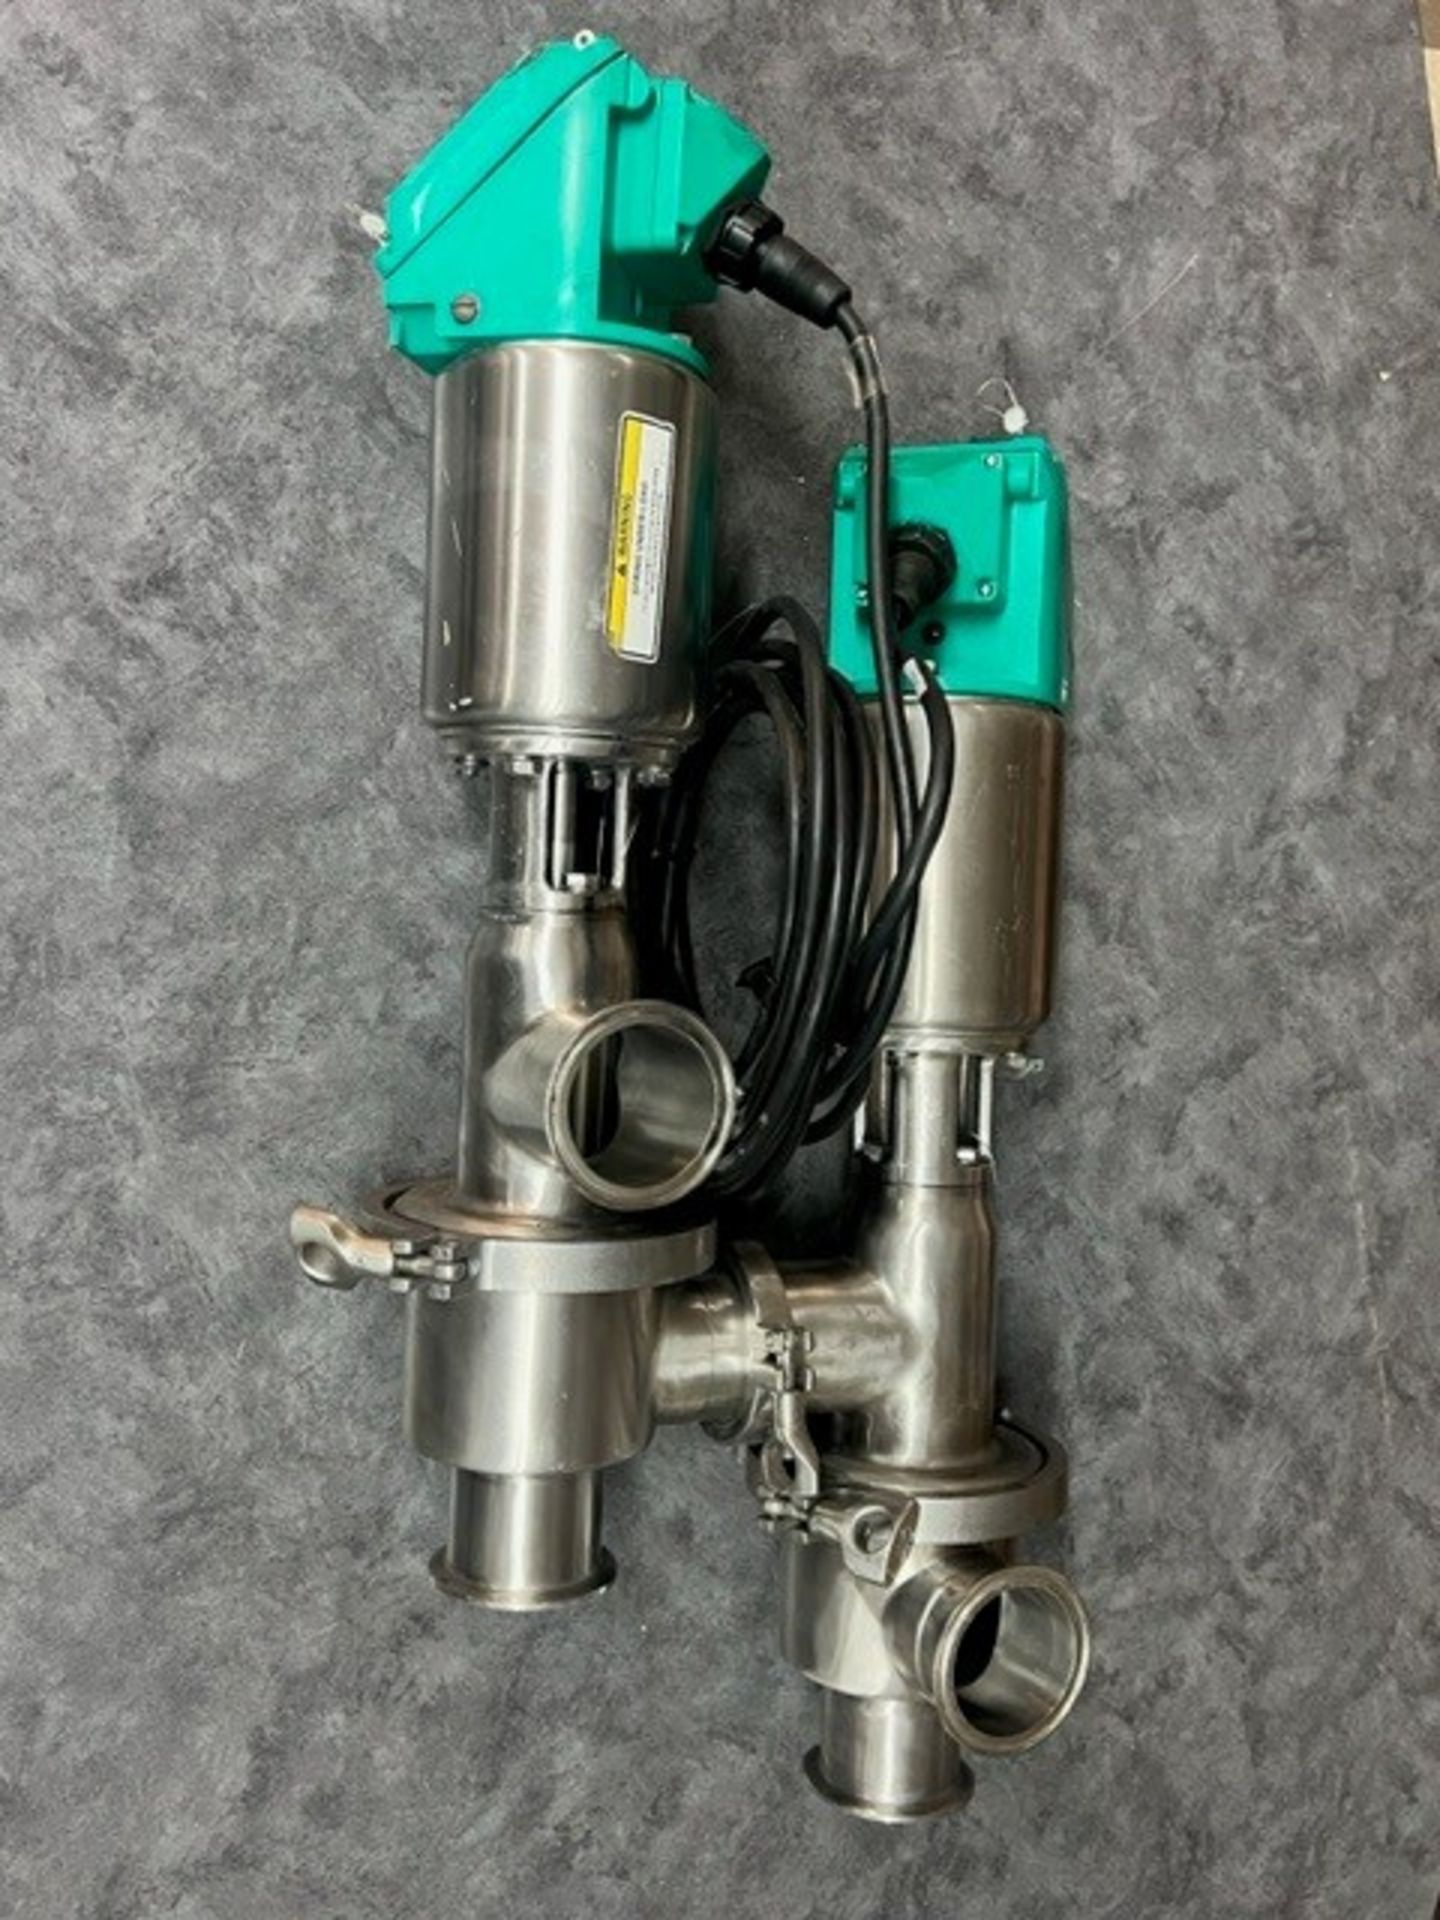 Tri-Clover 2.5" Stainless Diversion Set, Model 762 with Teflon Stem and Legal Control Box with